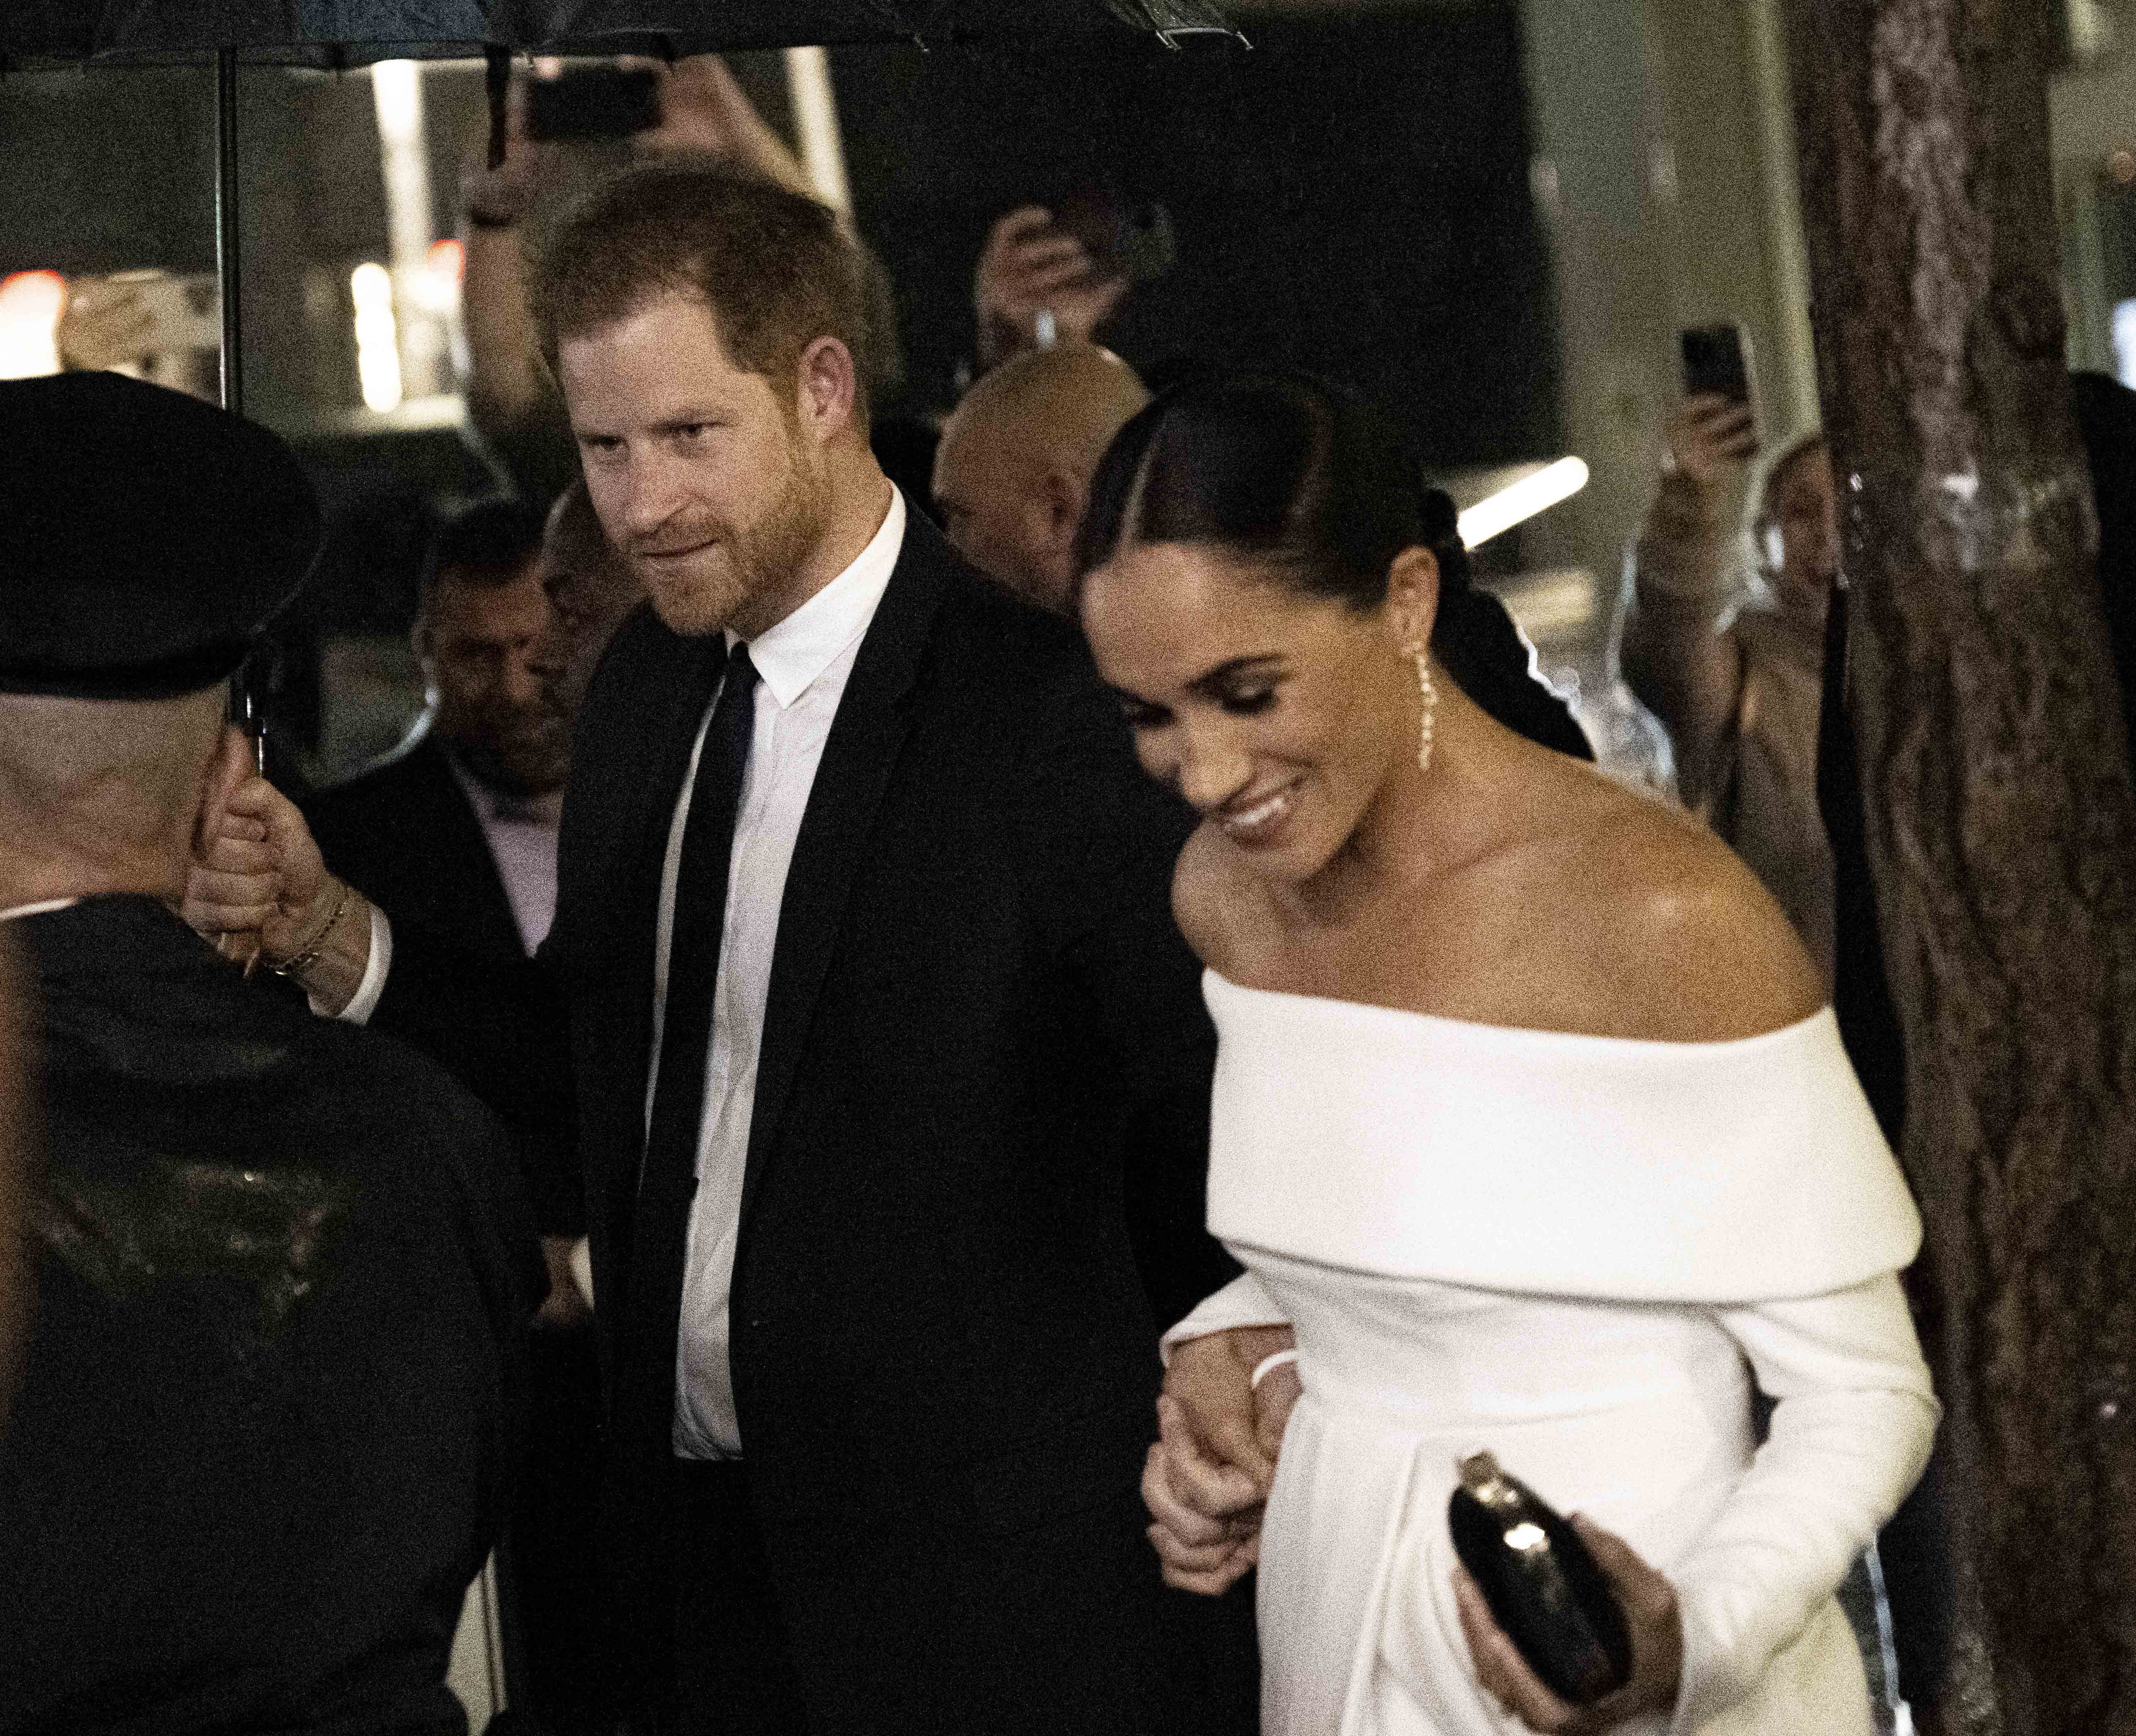 After watching part one of 'Harry & Meghan' on Netflix, royal expert Jonathan Sacerdoti gives his review.